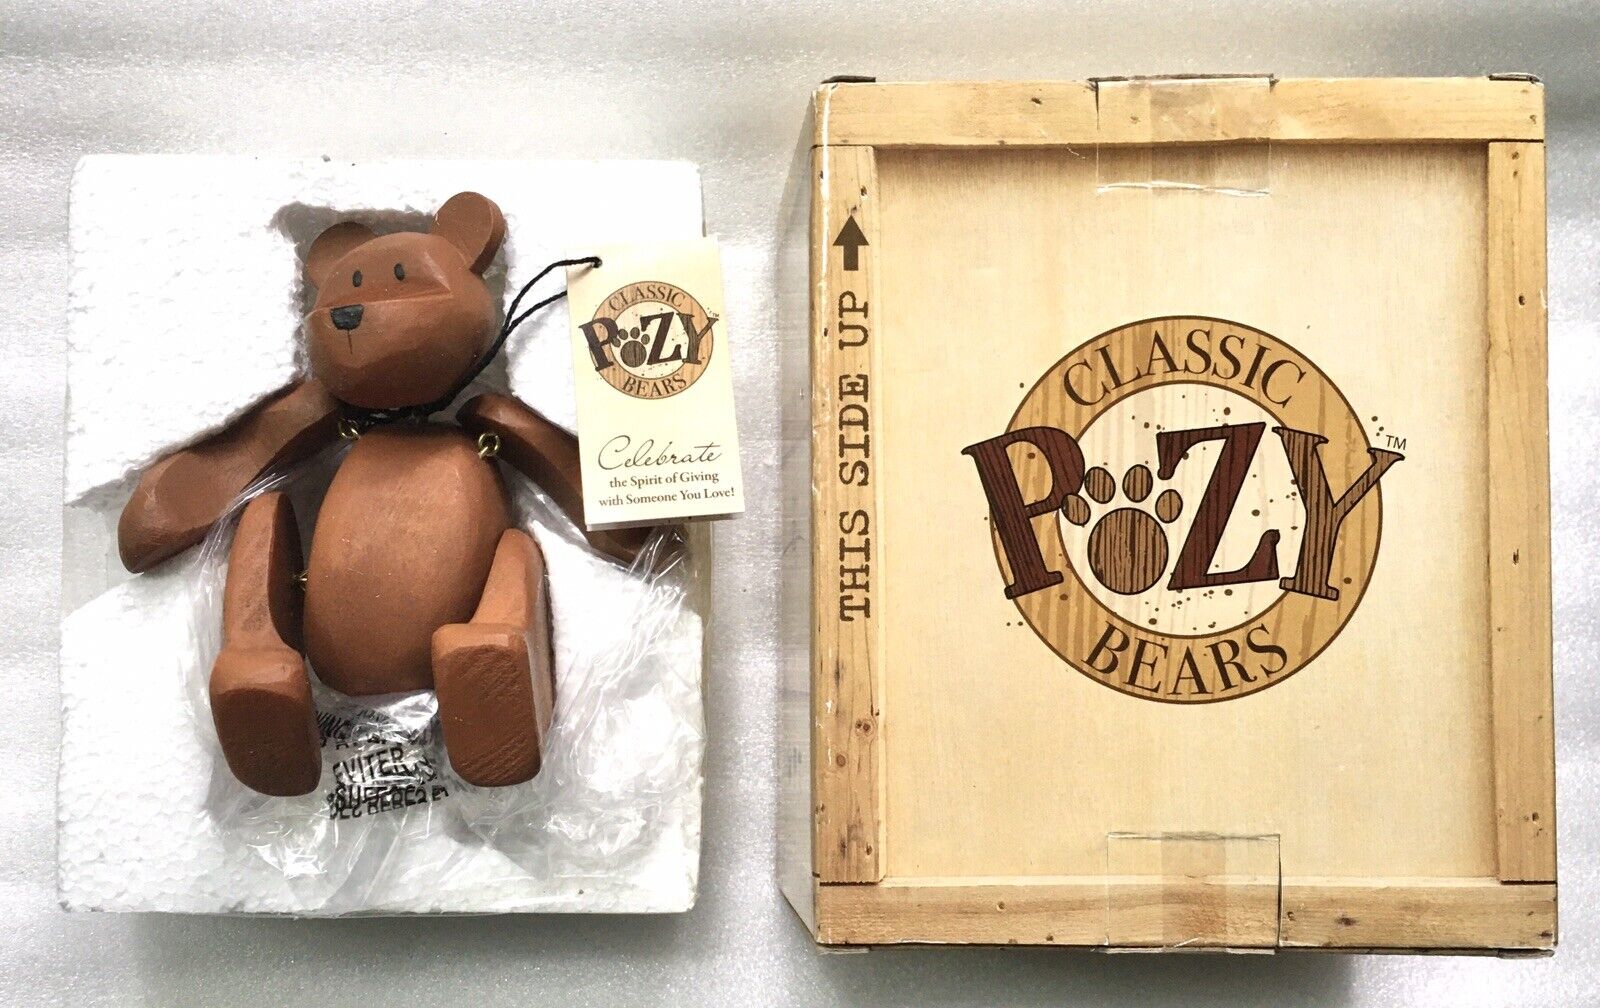 Pozy Bears Well Loved Wood Crafted Bear Figurine (light brown) #320003 2010 NEW